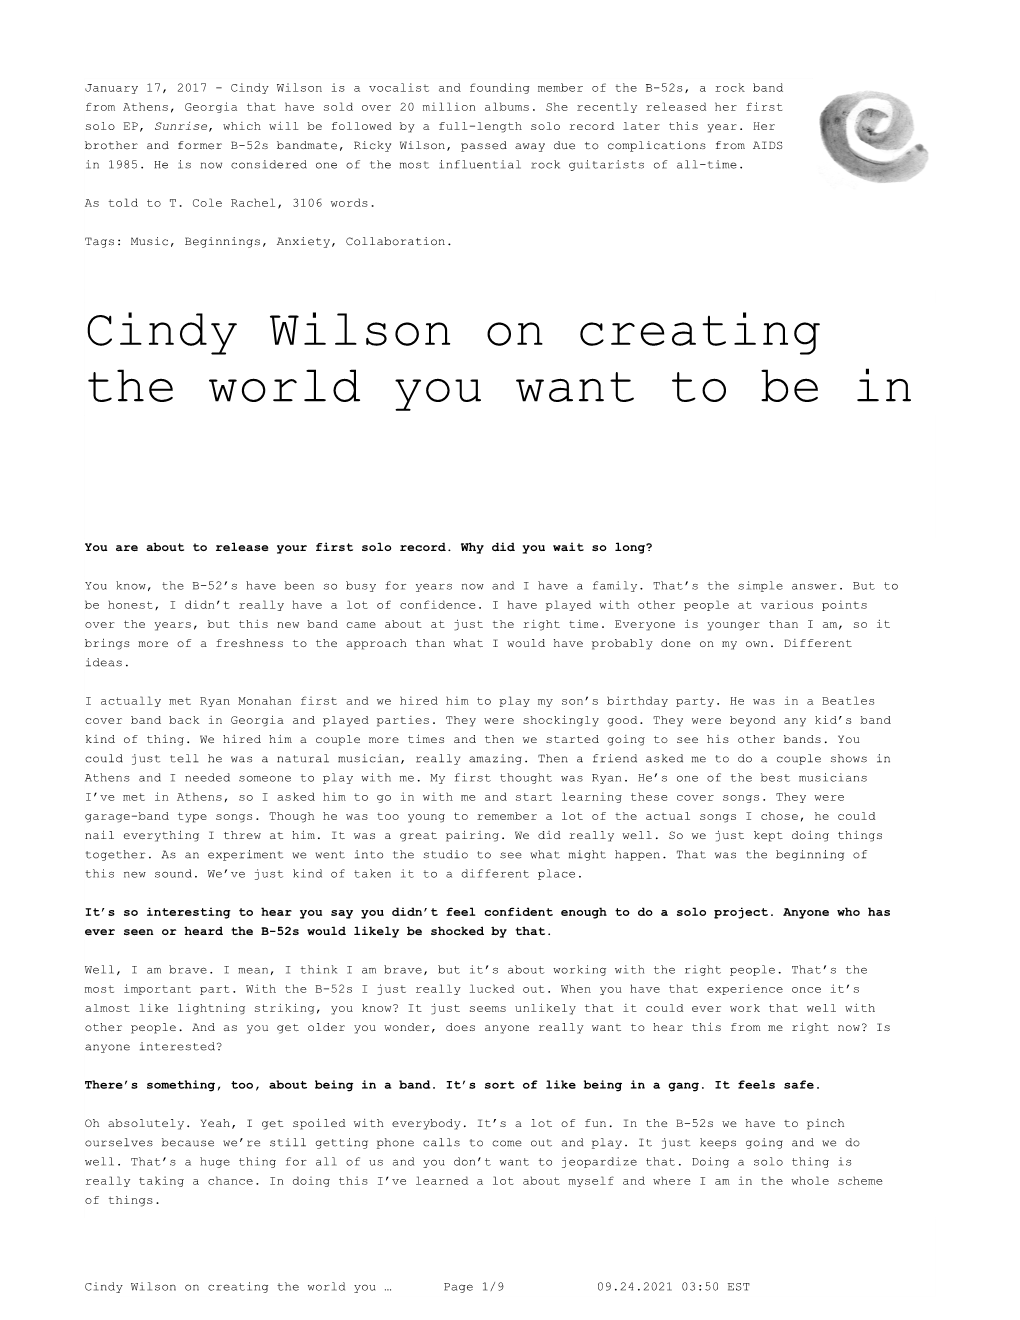 Cindy Wilson on Creating the World You Want to Be In